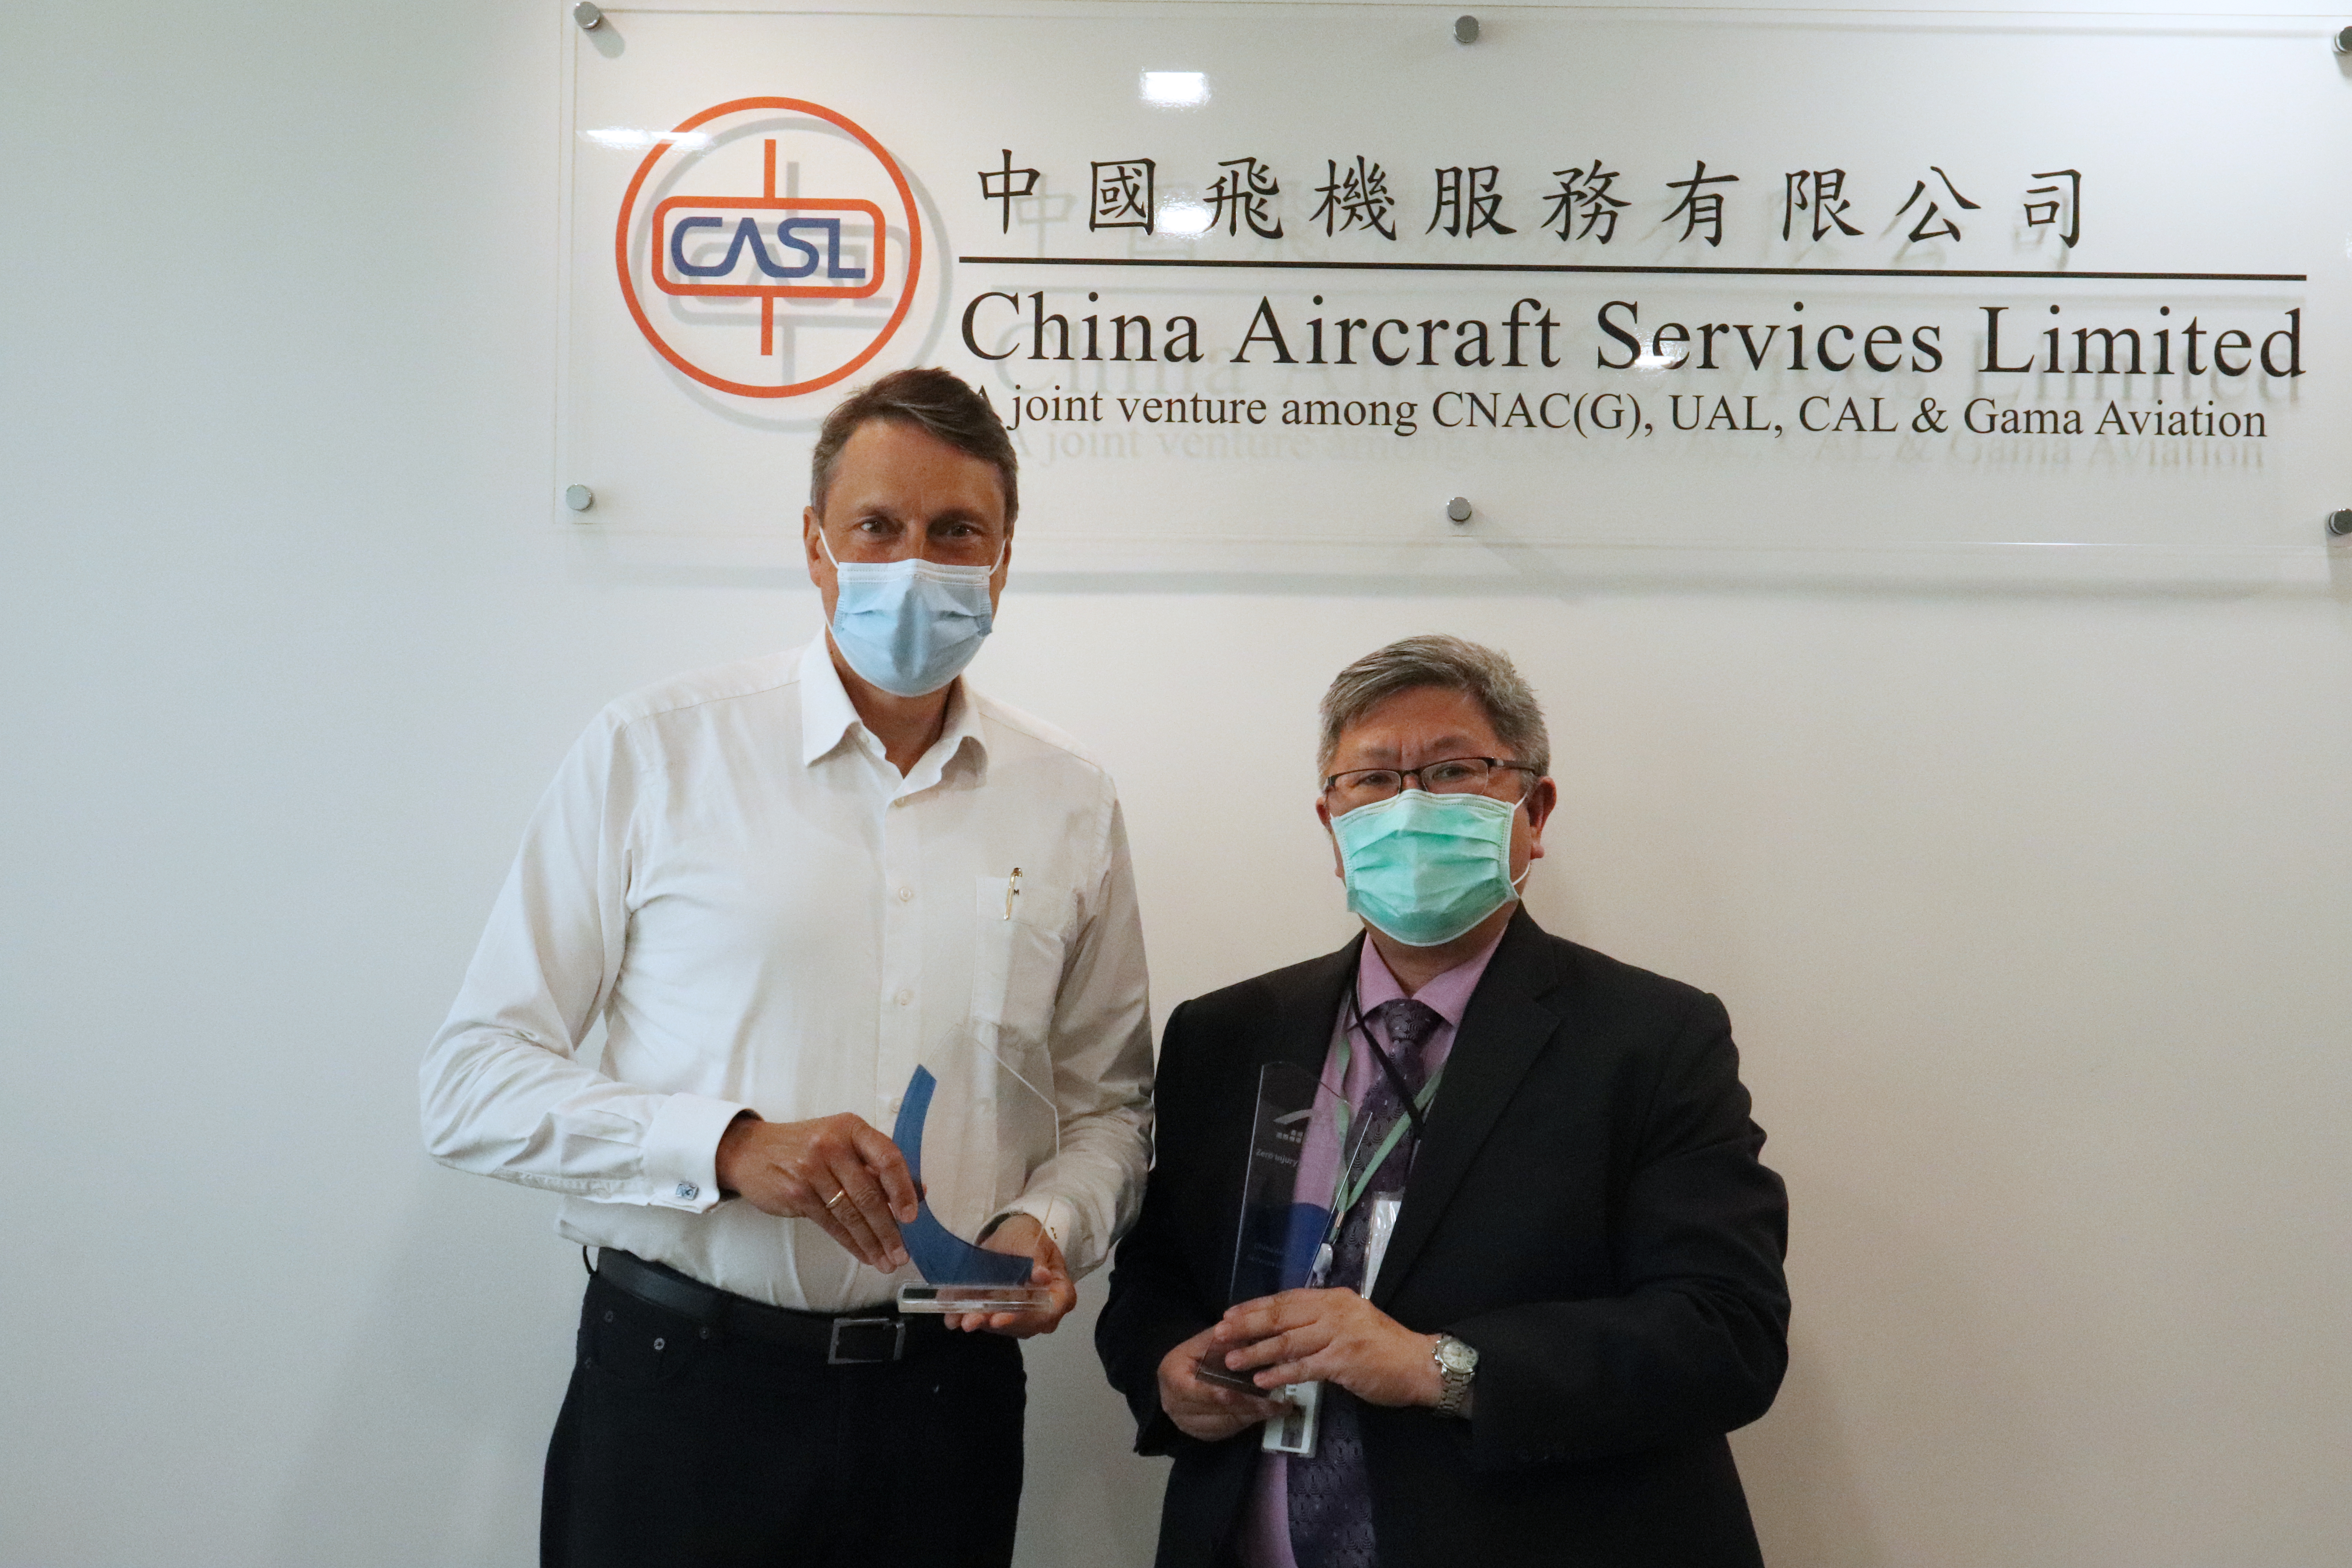 CASL receives two HKIA safety awards again